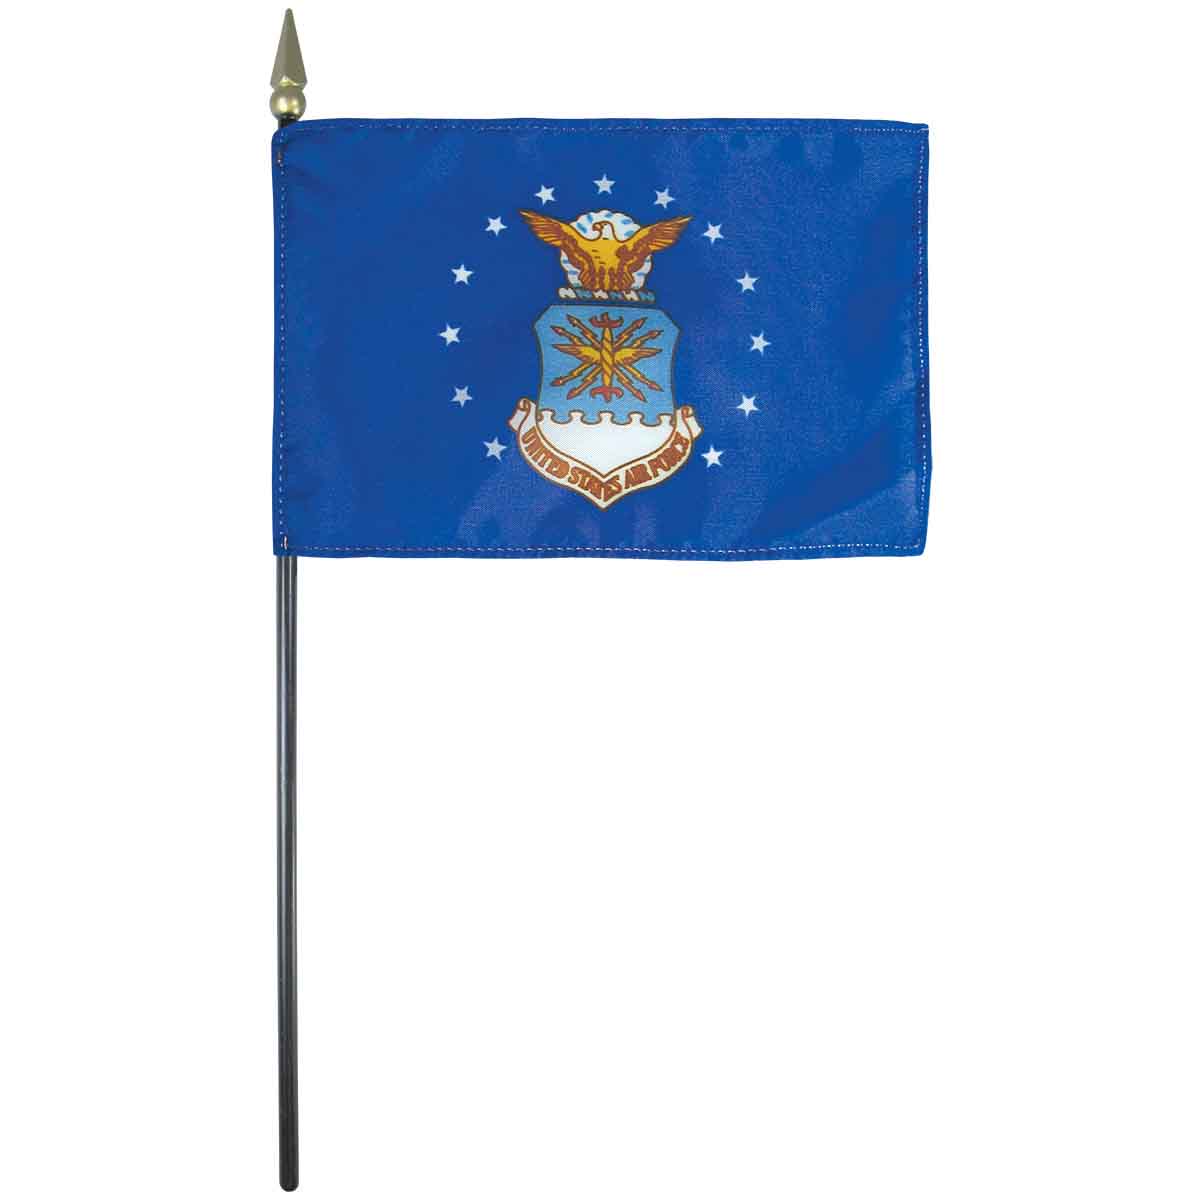 Mounted Air Force Flags